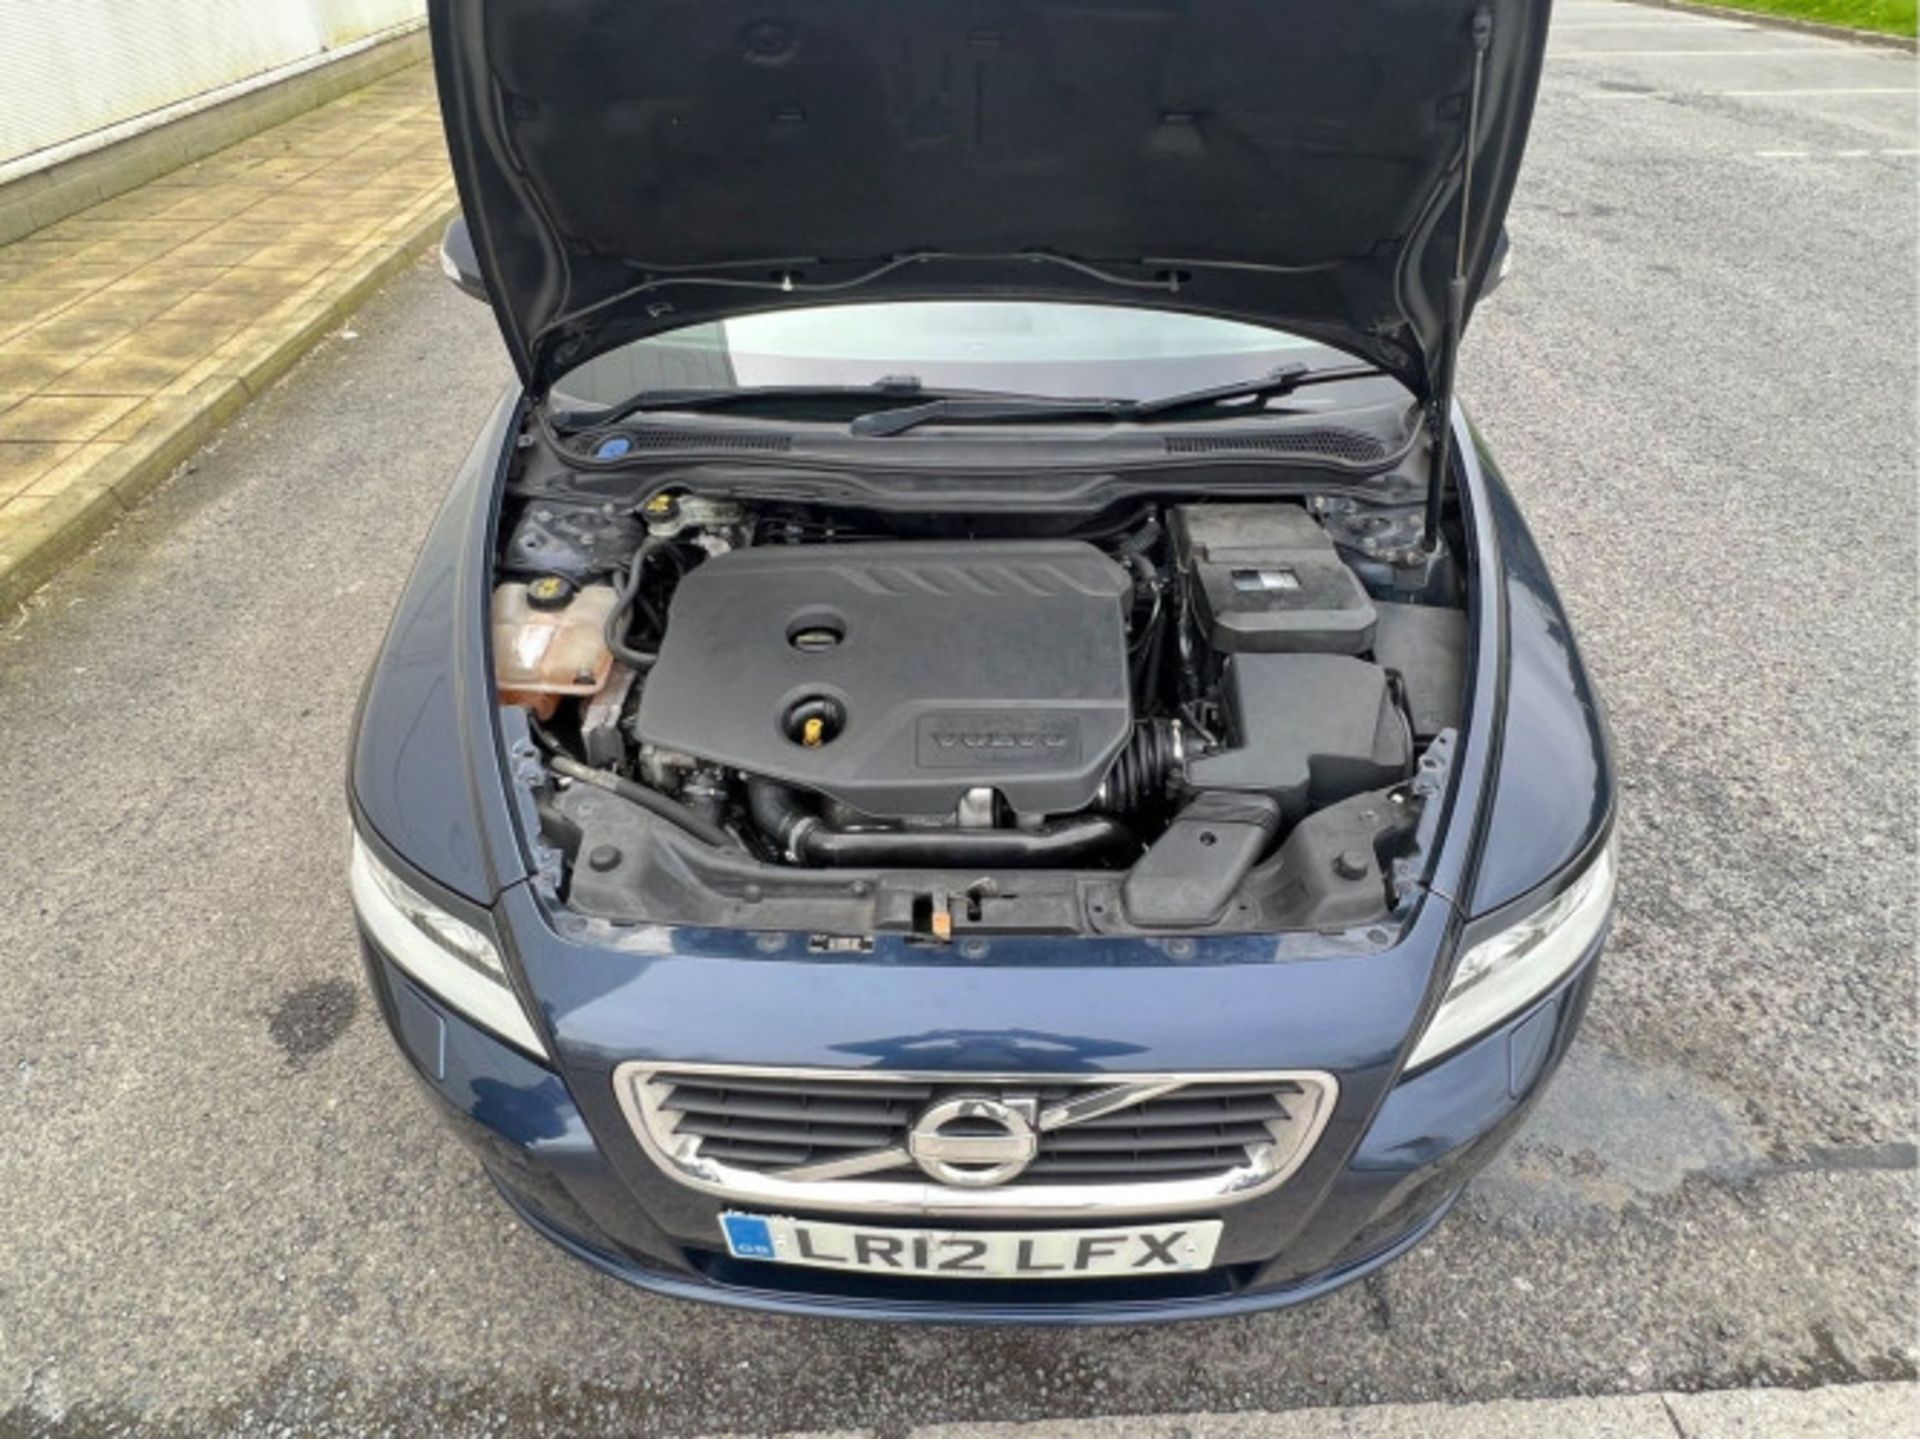 VOLVO V50 1.6D DRIVE SE LUX EDITION EURO 5 (S/S) 5DR (2012) - Image 44 of 88